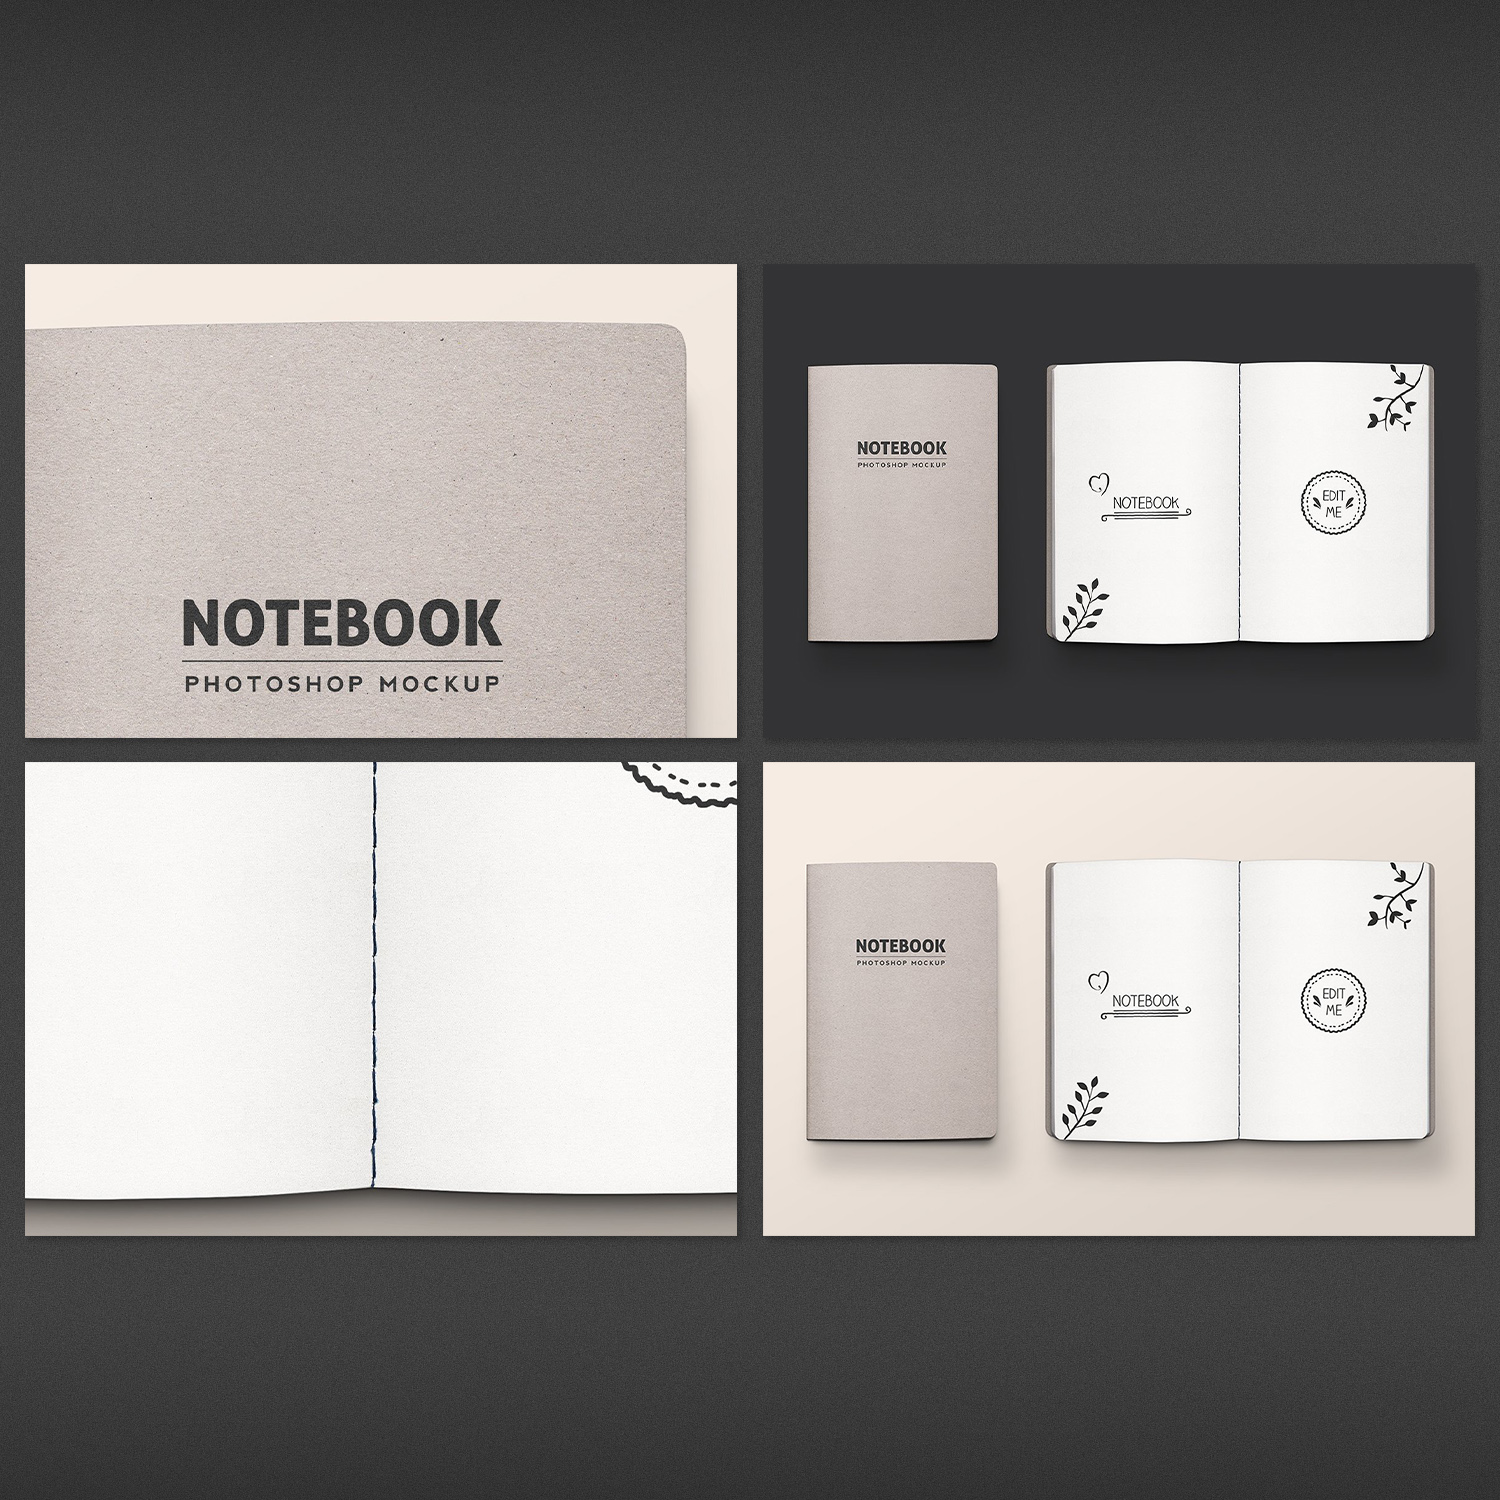 A set of stitched notebook images with great designs.